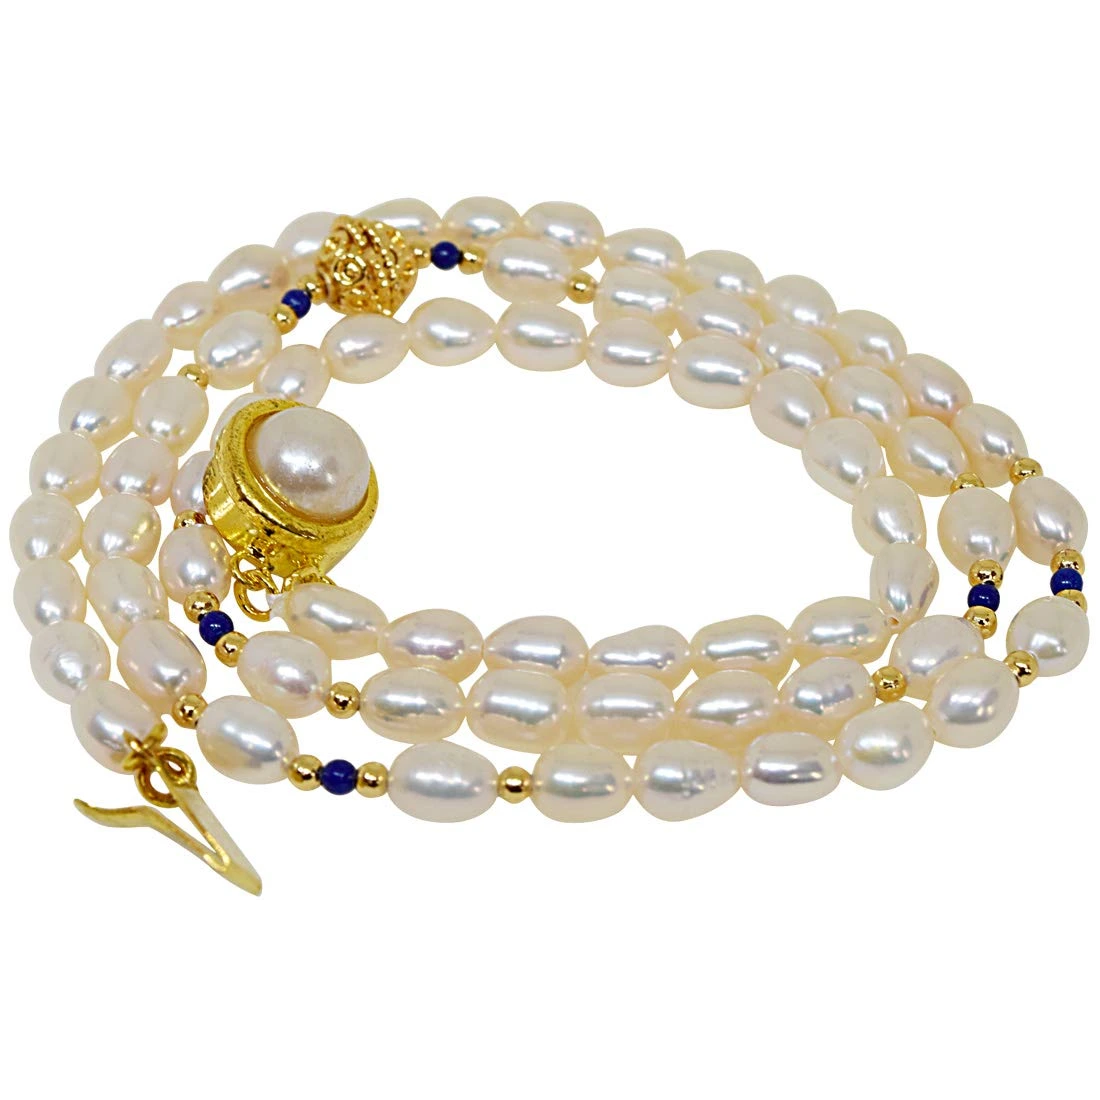 Adoration - Single Line Real Pearl Necklace with Blue Lapiz & Gold Plated Ball & Beads (SN47)